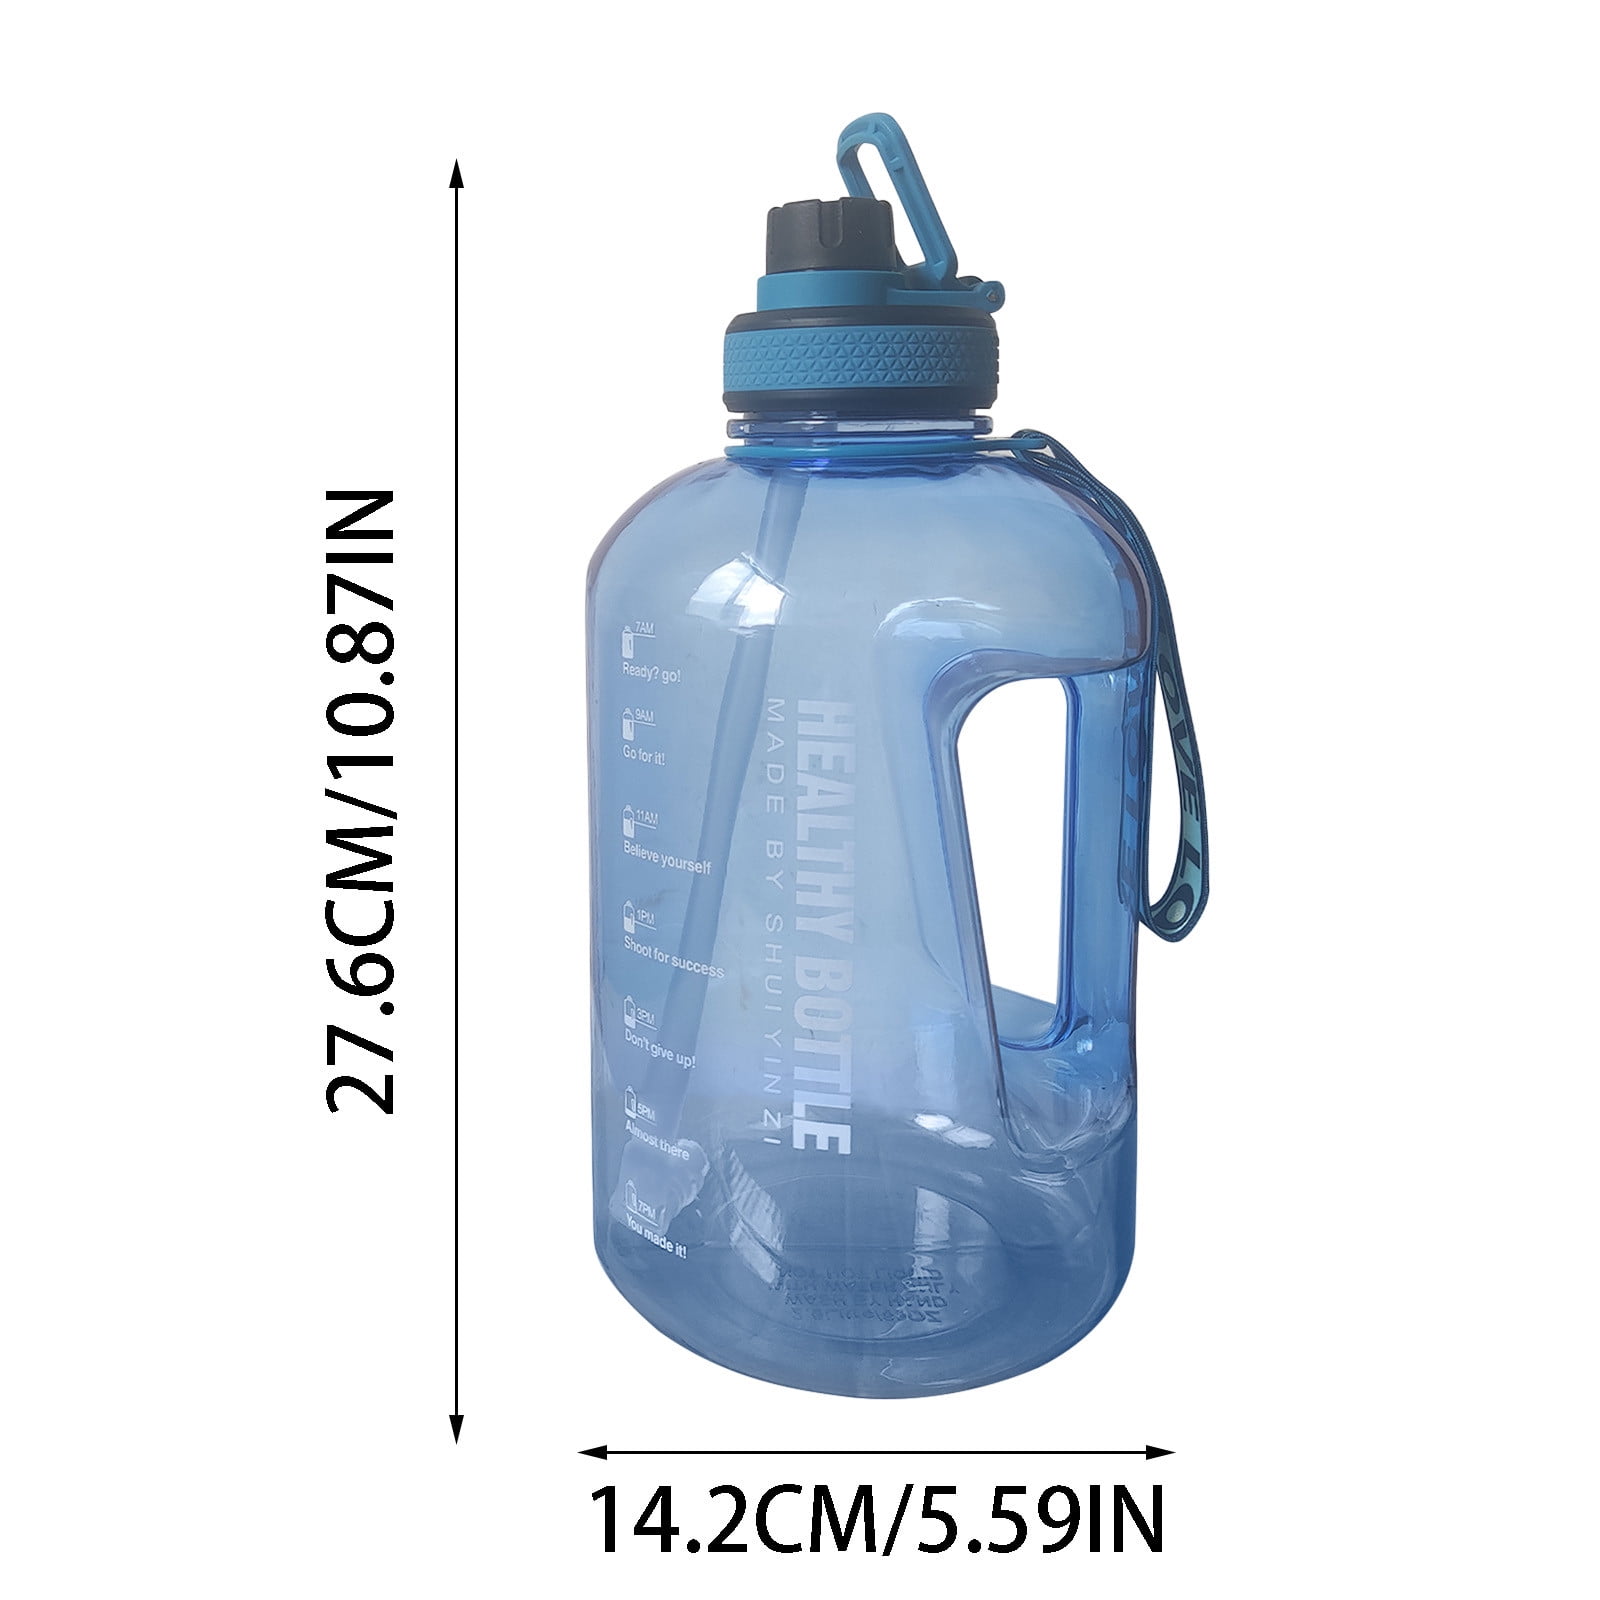 Collapsible Water Bottles, 2L/64OZ travel water bottle Bottle with Straw,  Half Gallon Large Water Bo…See more Collapsible Water Bottles, 2L/64OZ